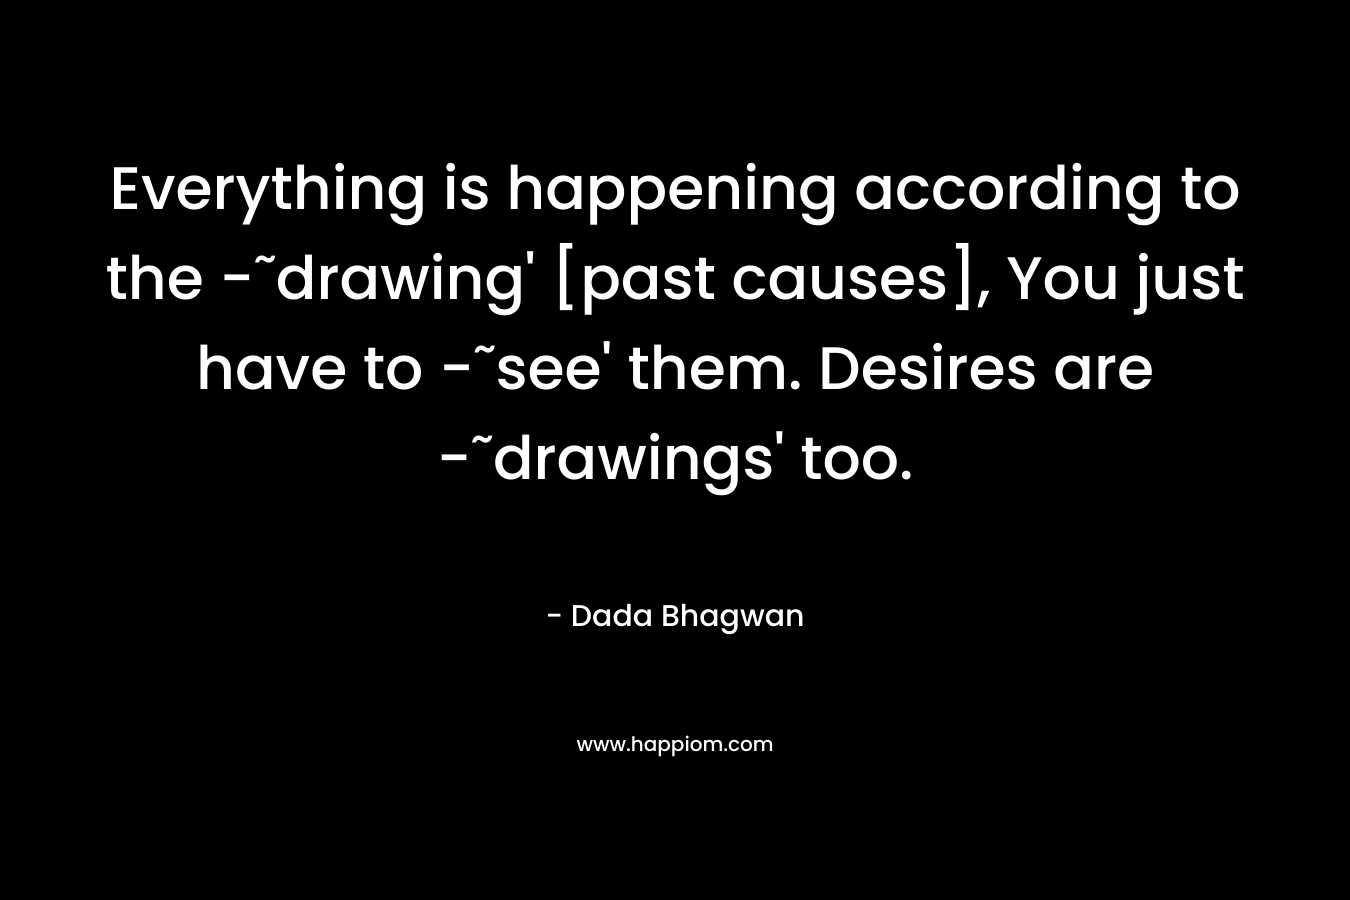 Everything is happening according to the -˜drawing' [past causes], You just have to -˜see' them. Desires are -˜drawings' too.